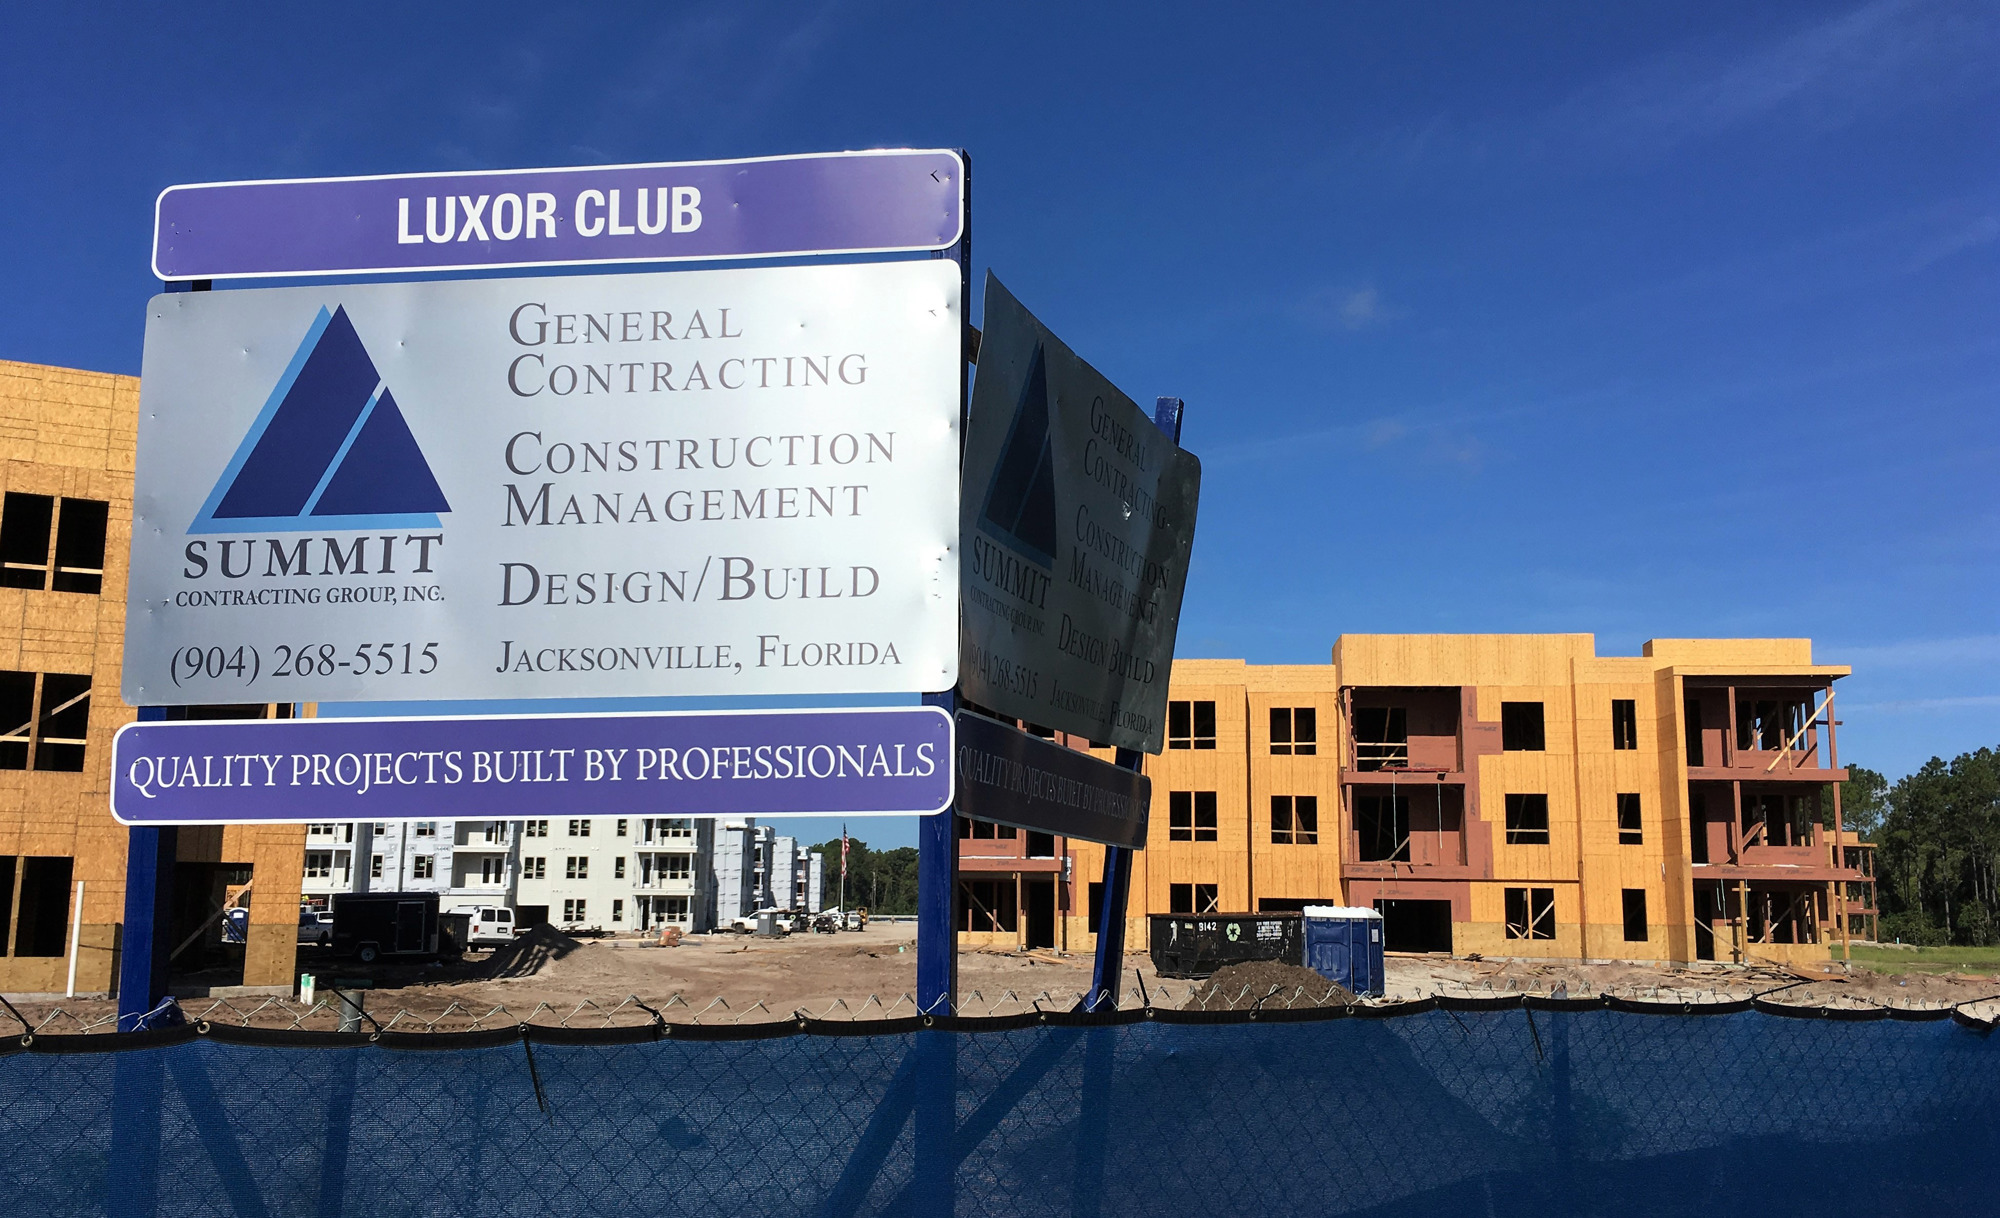 Construction is underway at the Luxor Club Apartments, a 464-unit luxury community on Egrets Nest Drive in the Flagler Center area of south Jacksonville. The project is scheduled to open this winter.